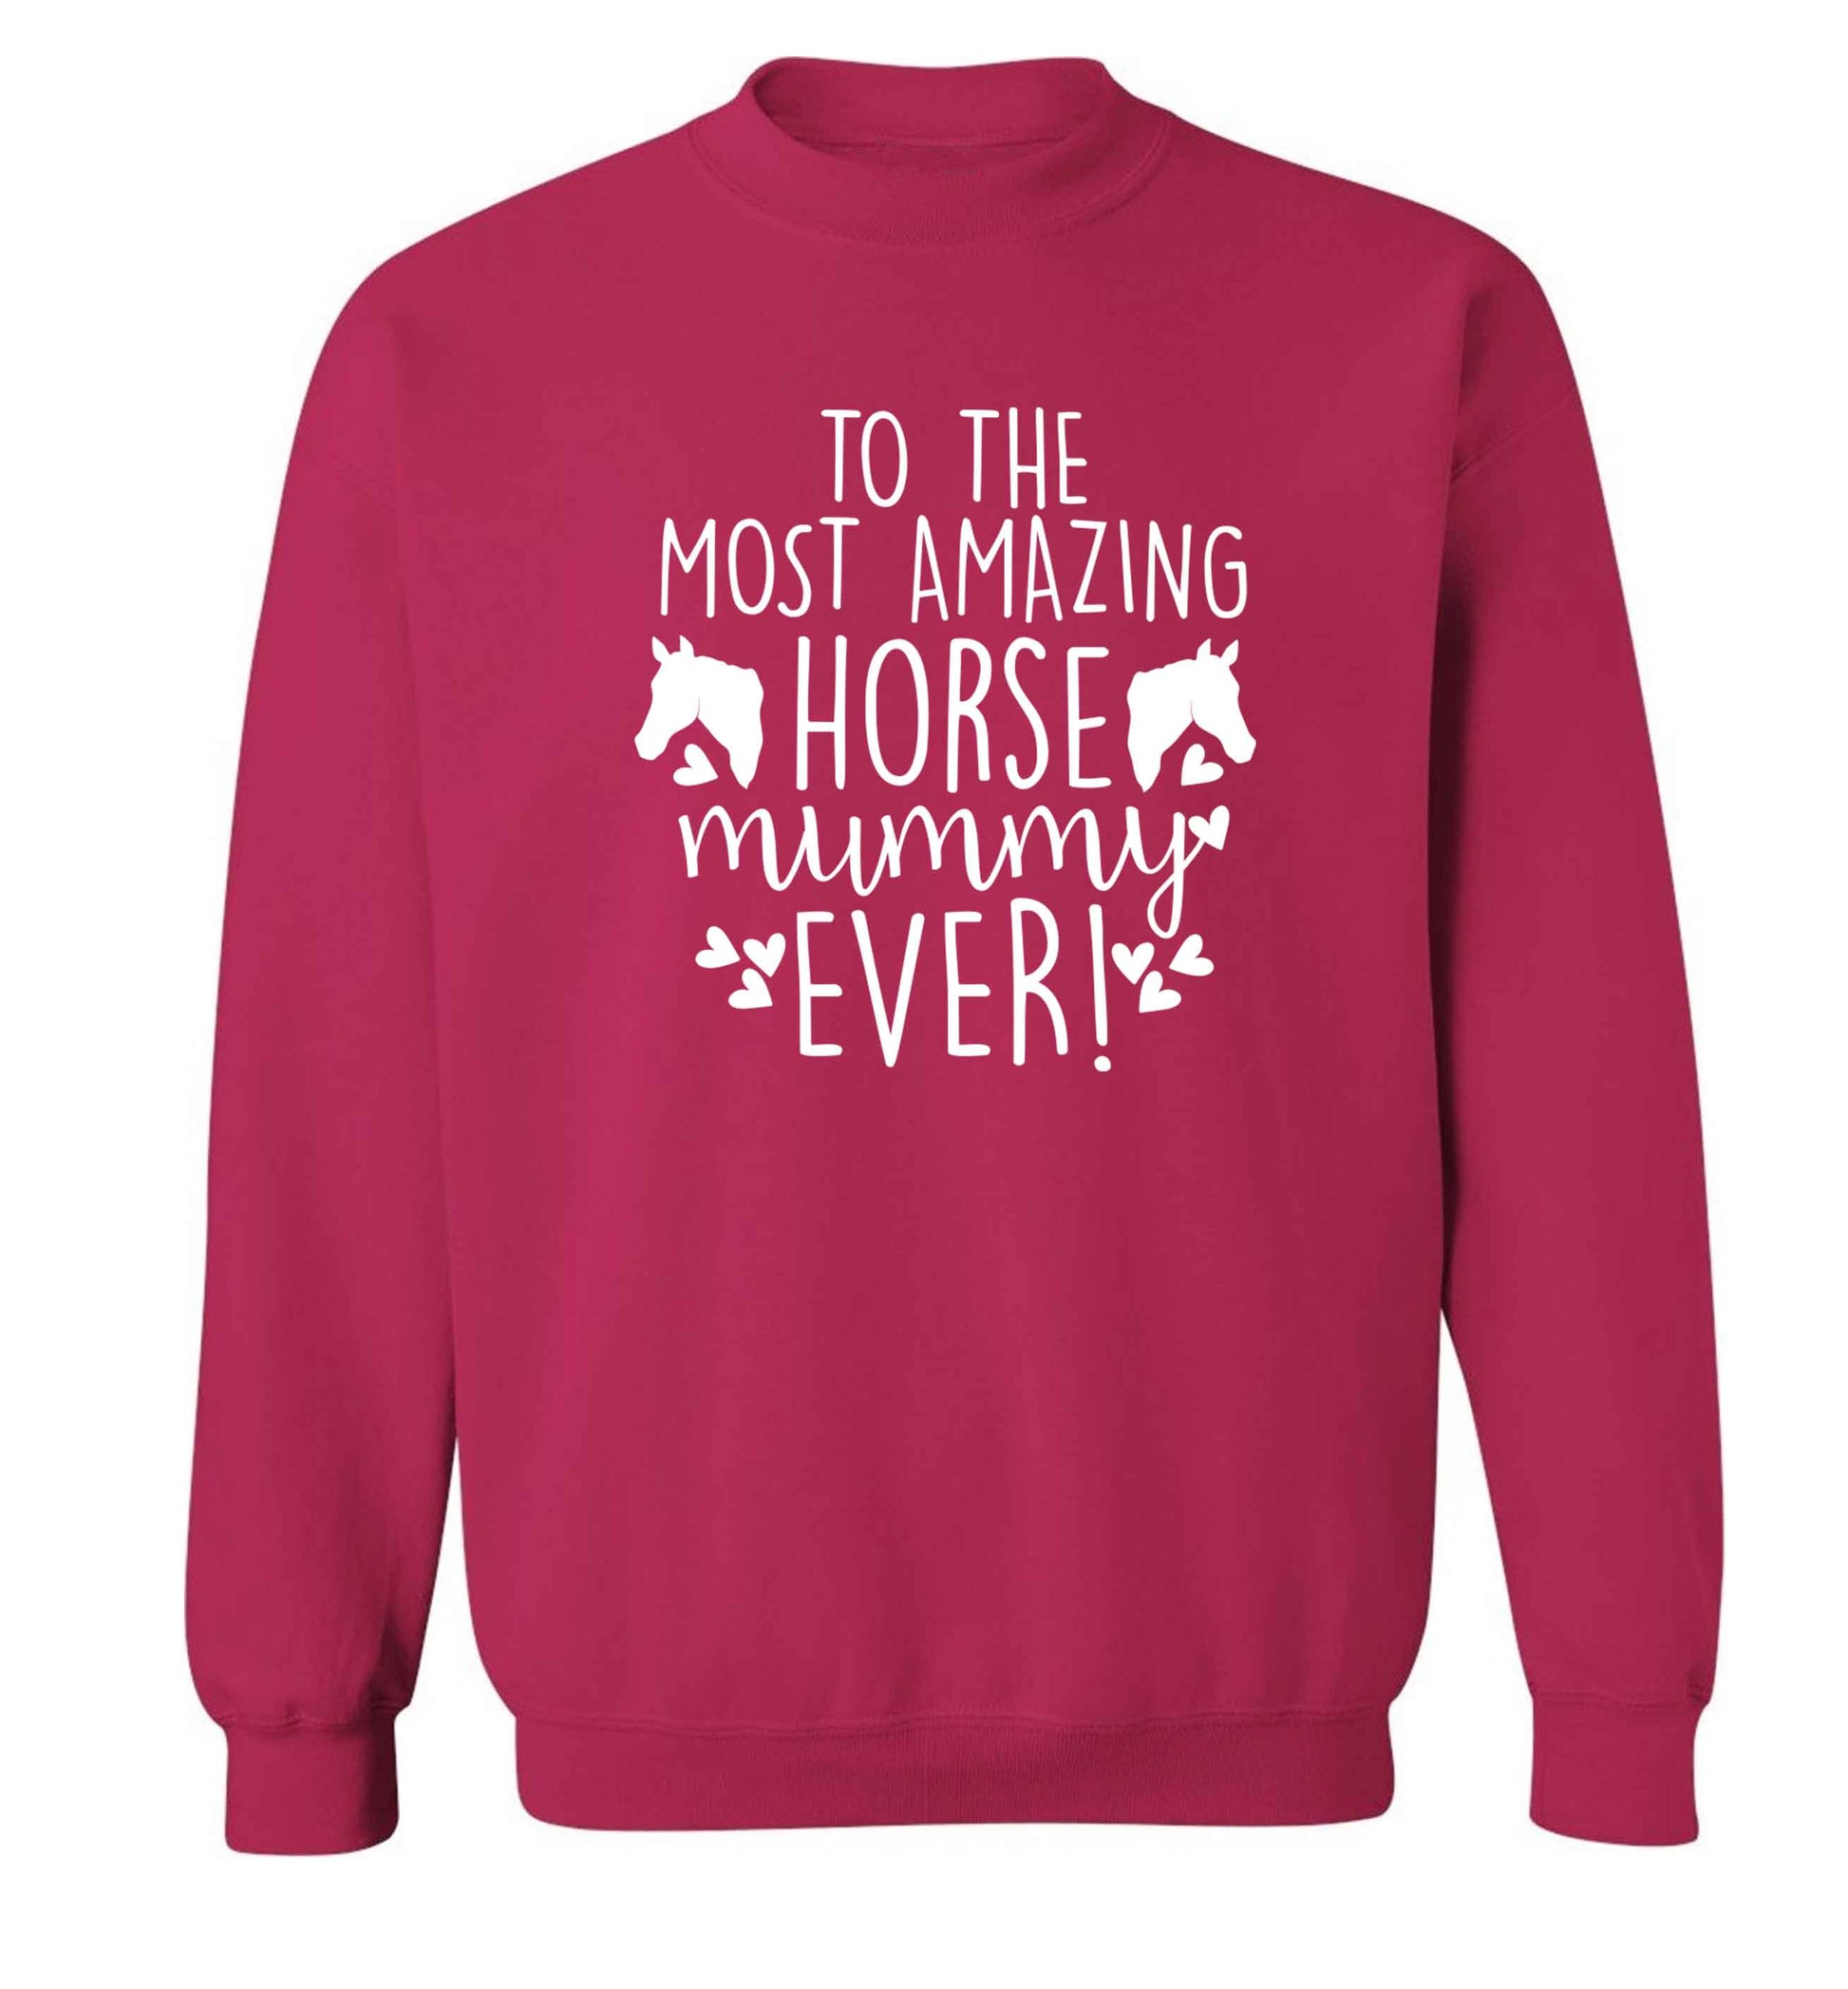 To the most amazing horse mummy ever! adult's unisex pink sweater 2XL